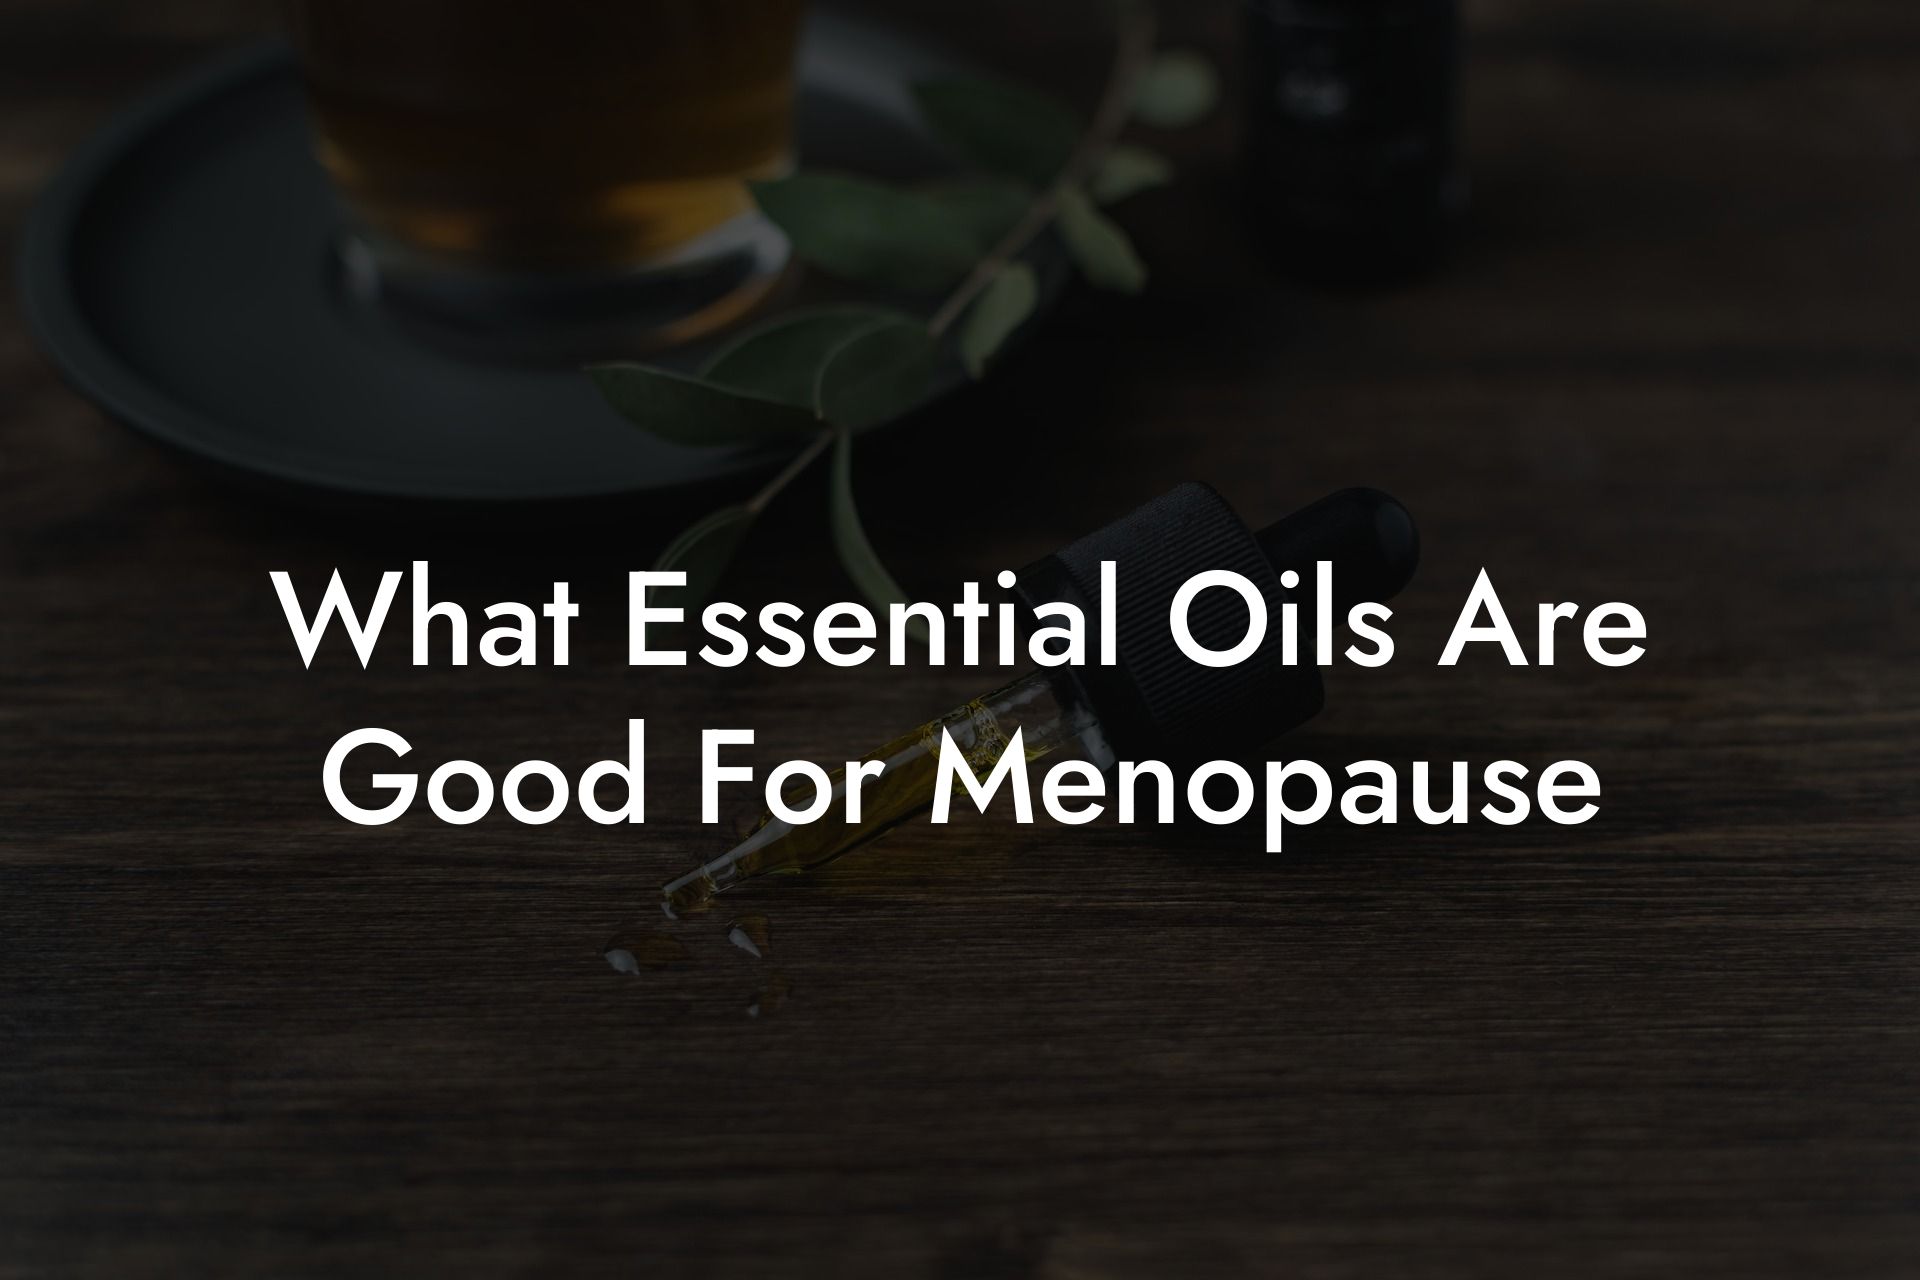 What Essential Oils Are Good For Menopause